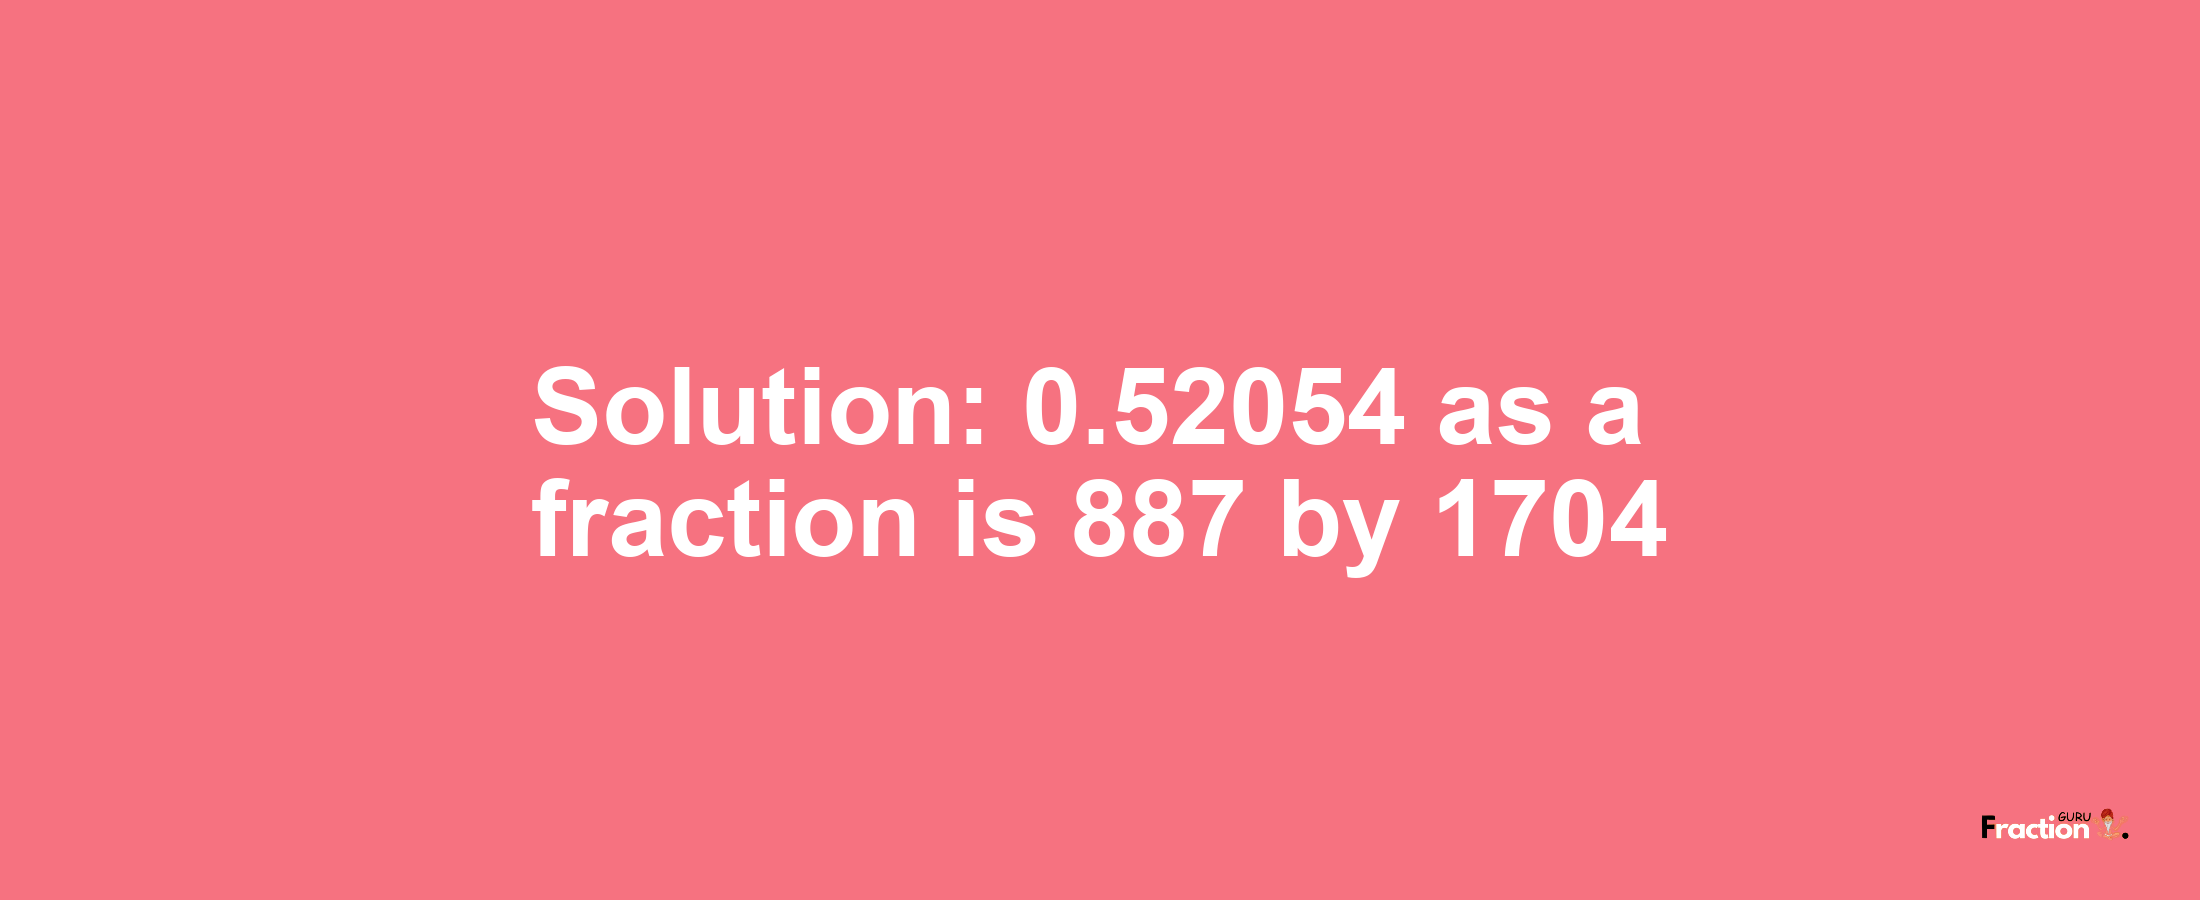 Solution:0.52054 as a fraction is 887/1704